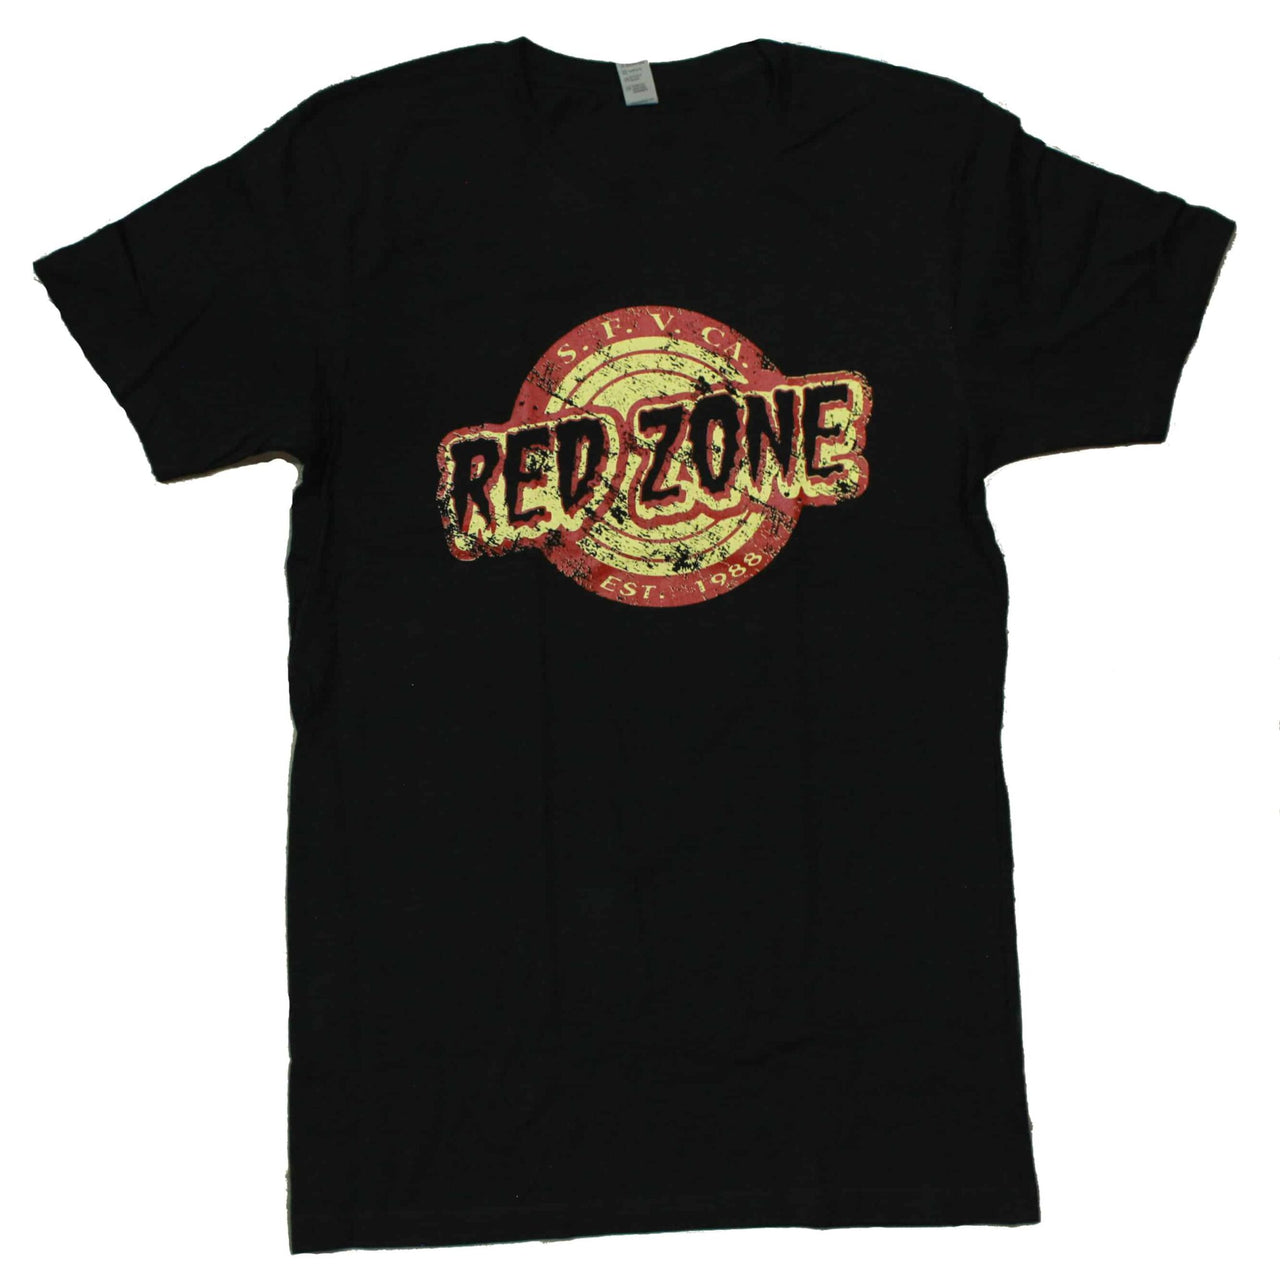 Red Zone Shop T-Shirt